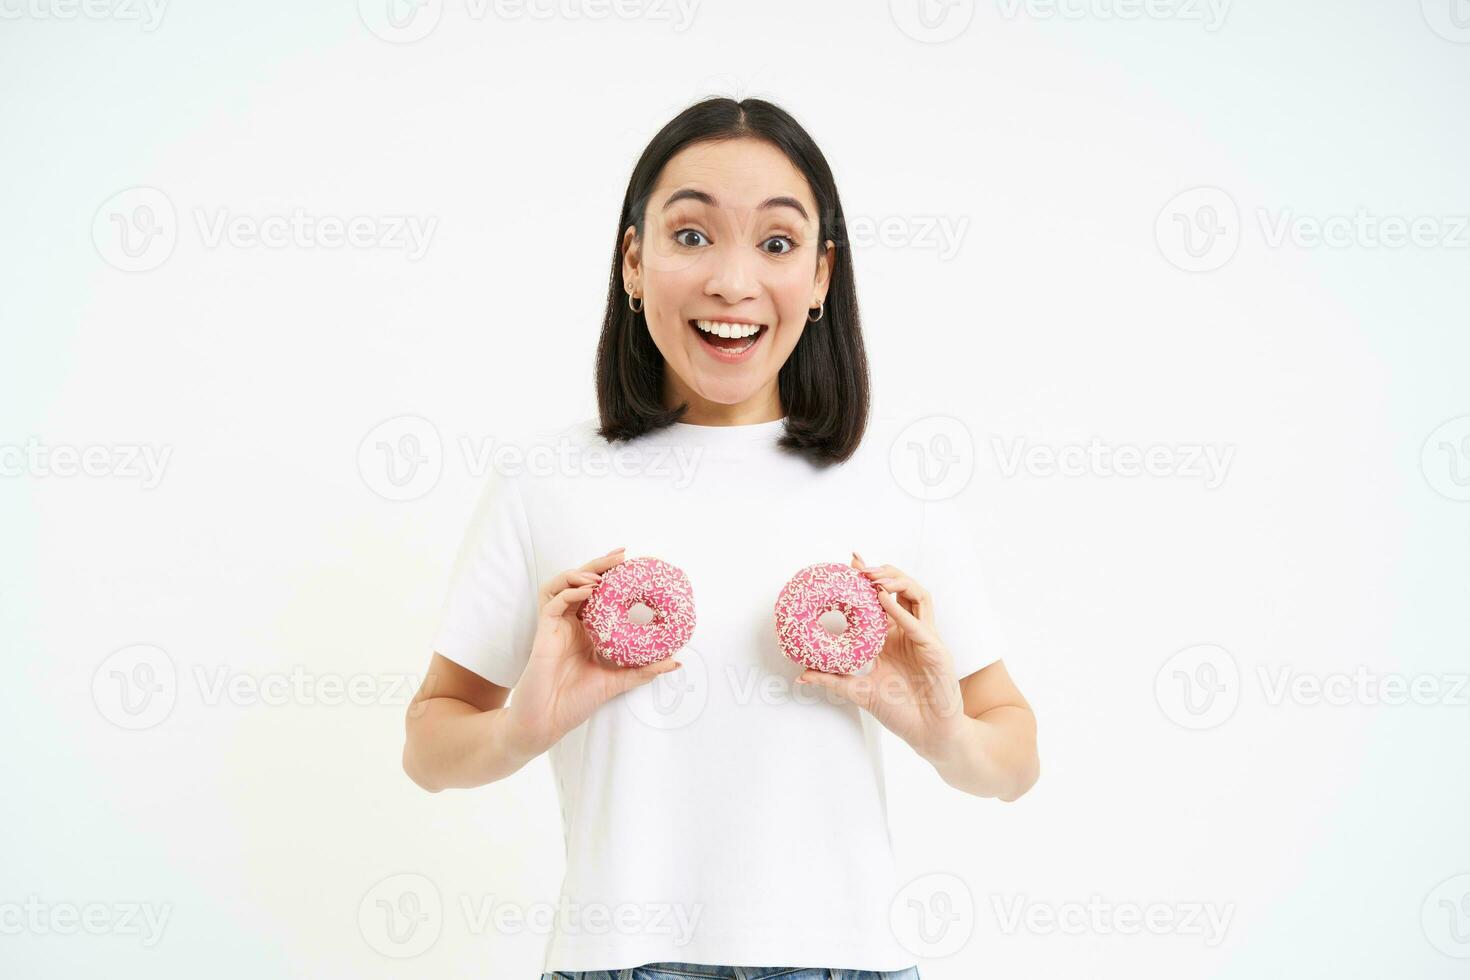 Funny korean woman posing with two delicious glazed doughnuts on chest, laughing and smiling, eats junk food, tasty dessert photo